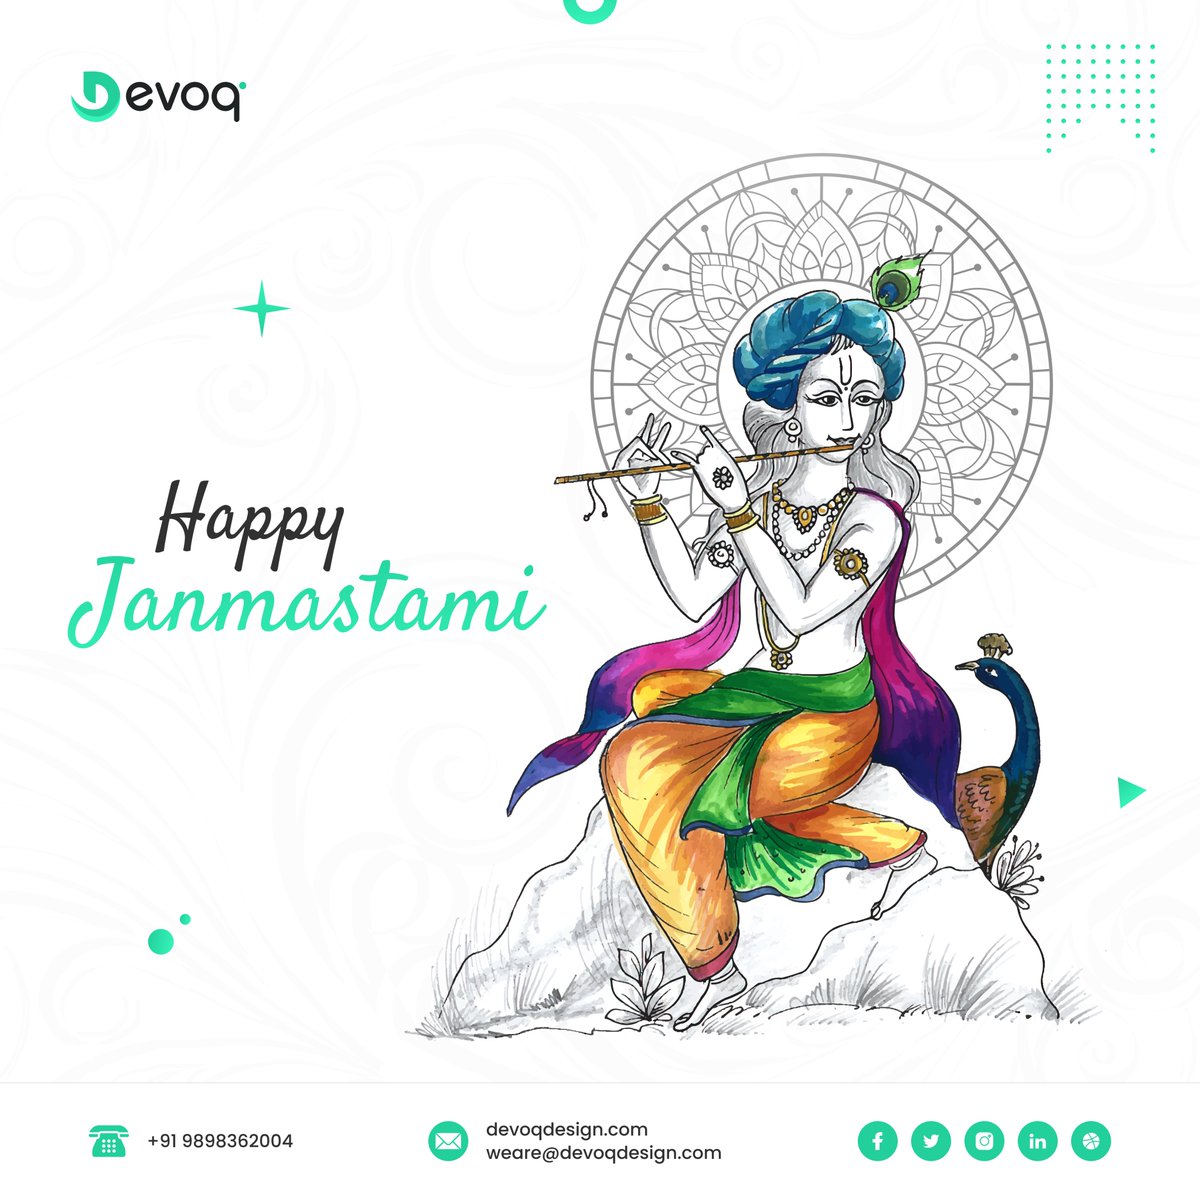 Wishing you all a joyful and blessed Janmashtami. 🙏

#Janmashtami #KrishnaJanmashtami #DivineCelebration #Janmashtami #KrishnaJanmashtami #LordKrishna #Janmashtami2023 #DivineCelebration #Bhakti #KrishnaTeachings #DivineGrace #KrishnaLeela #JanmashtamiWishes #JanmashtamiVibes